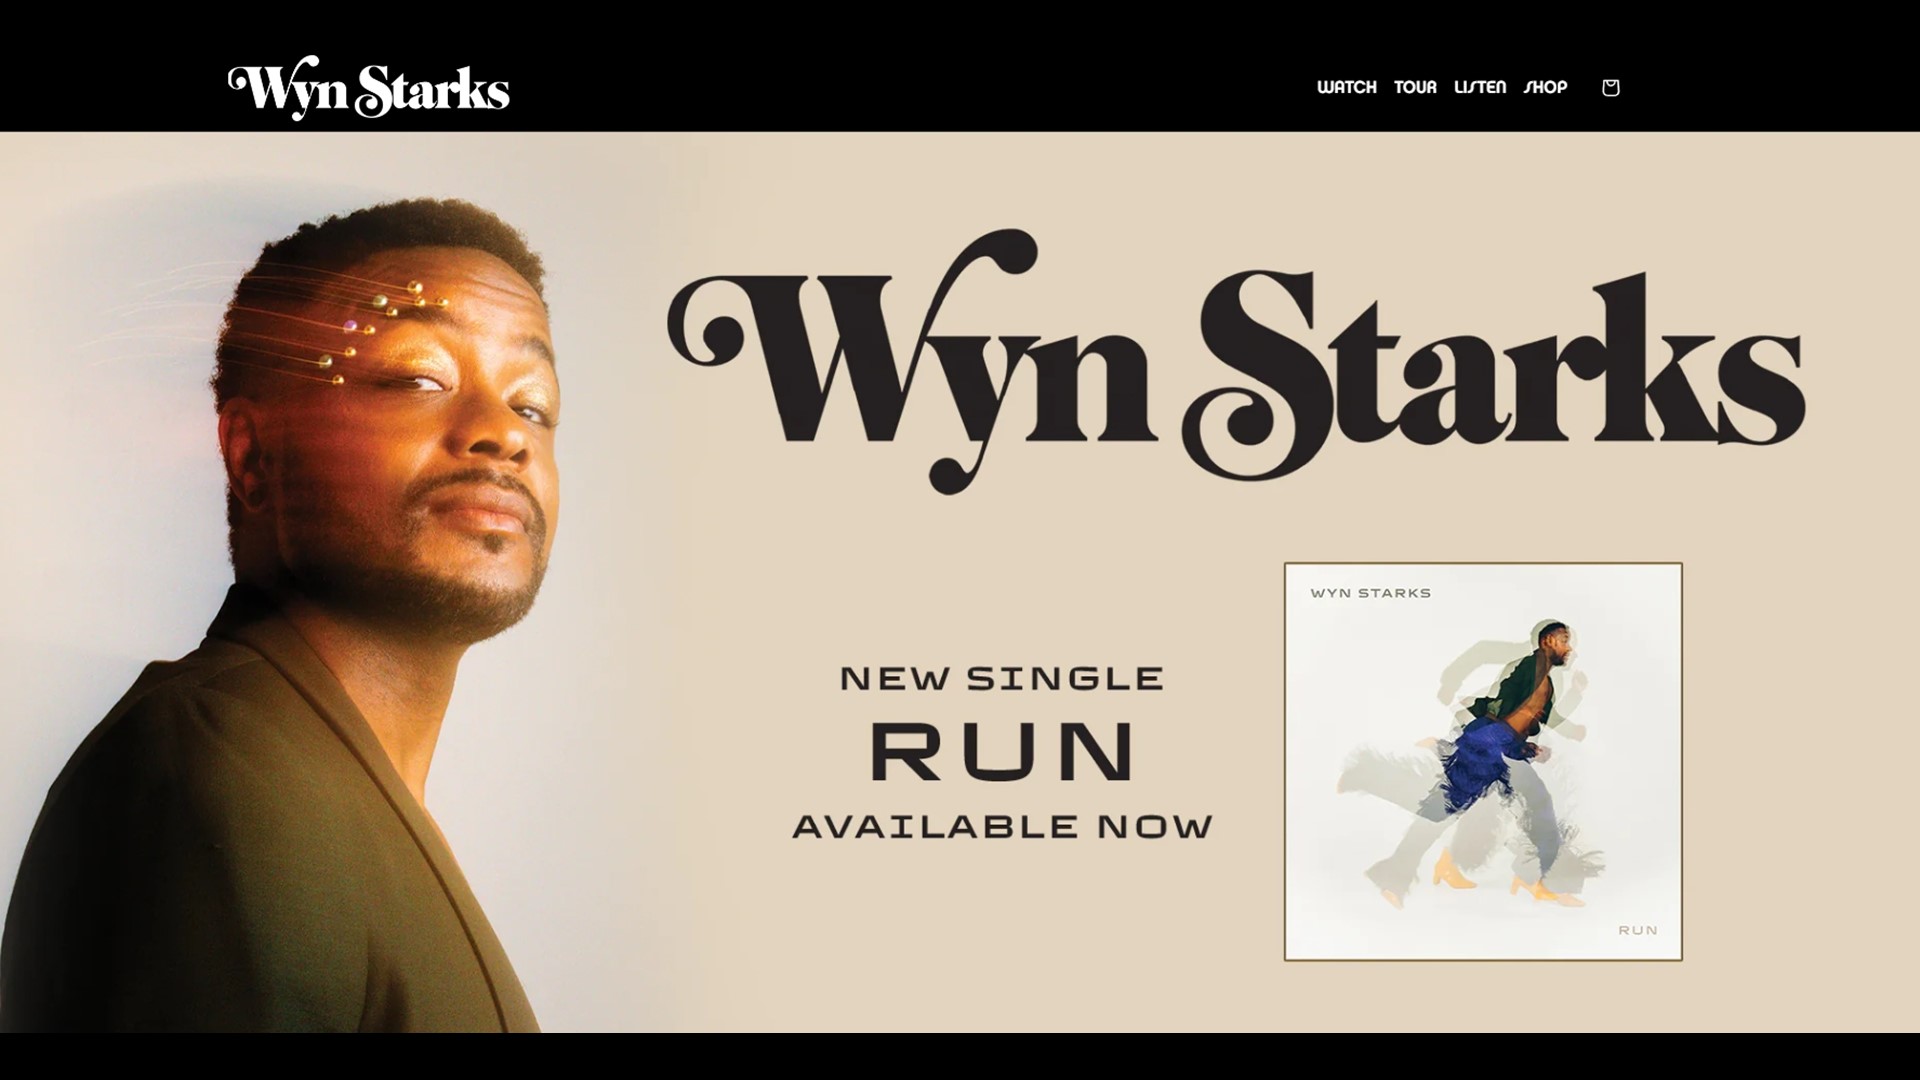 Listen to 'Run' on your preferred streaming service. Learn more at WynStarks.com. **PAID CONTENT**